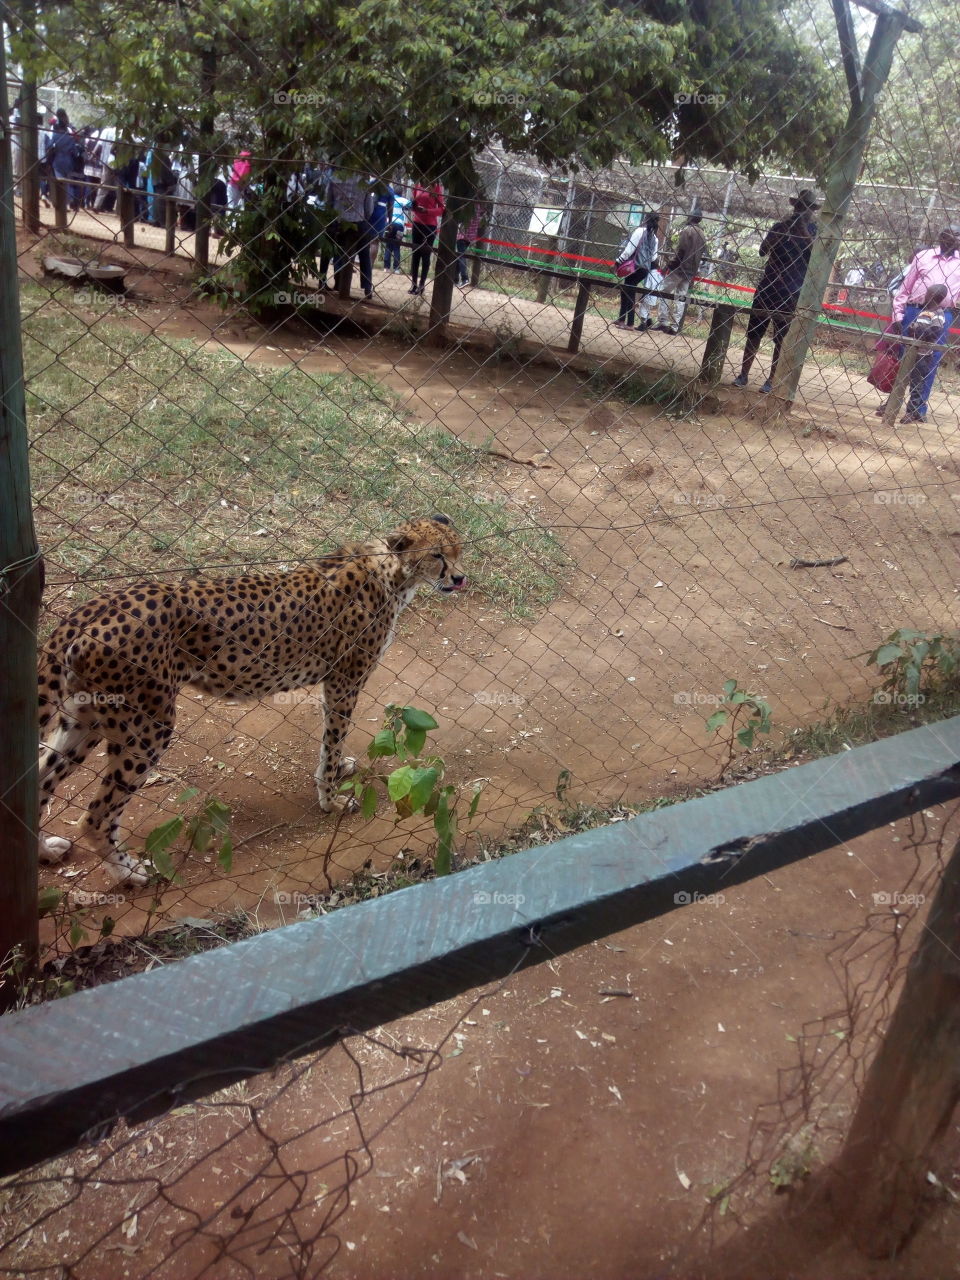 This was taken at Nairobi National park
The only animal park/orphanage within a city in the whole world